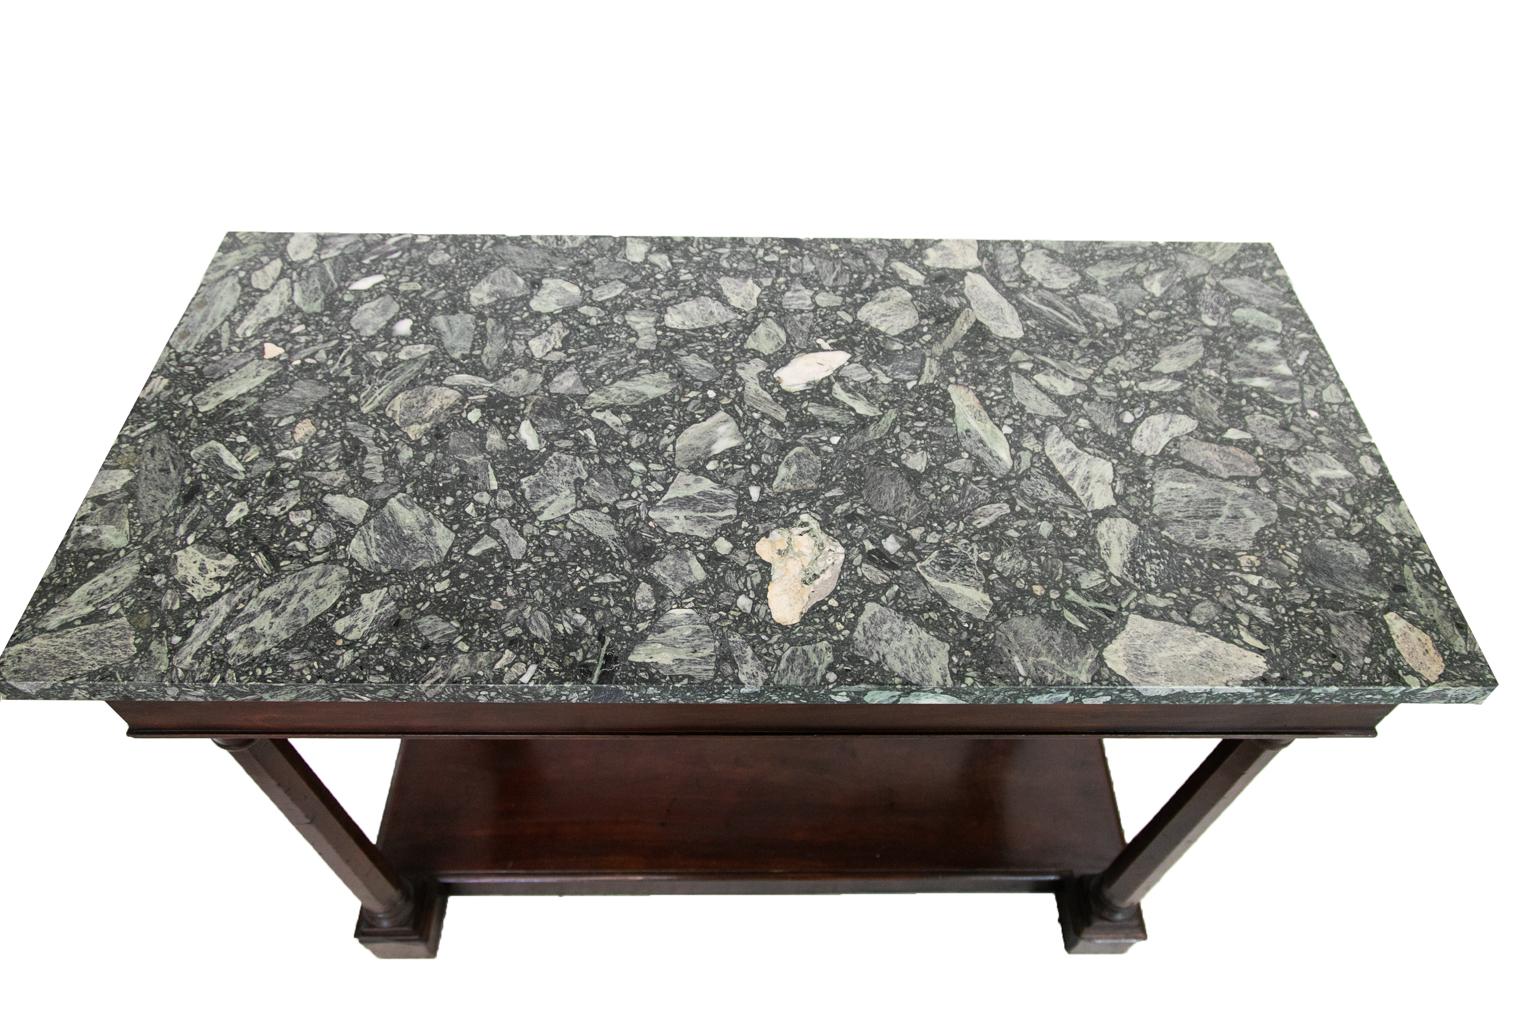 This English mahogany marble-top console table has octagonal shaped legs in the front, and flat legs in the rear with applied architectural pilasters. There are working drawers on the left and right ends. The wooden knobs are original. 
 